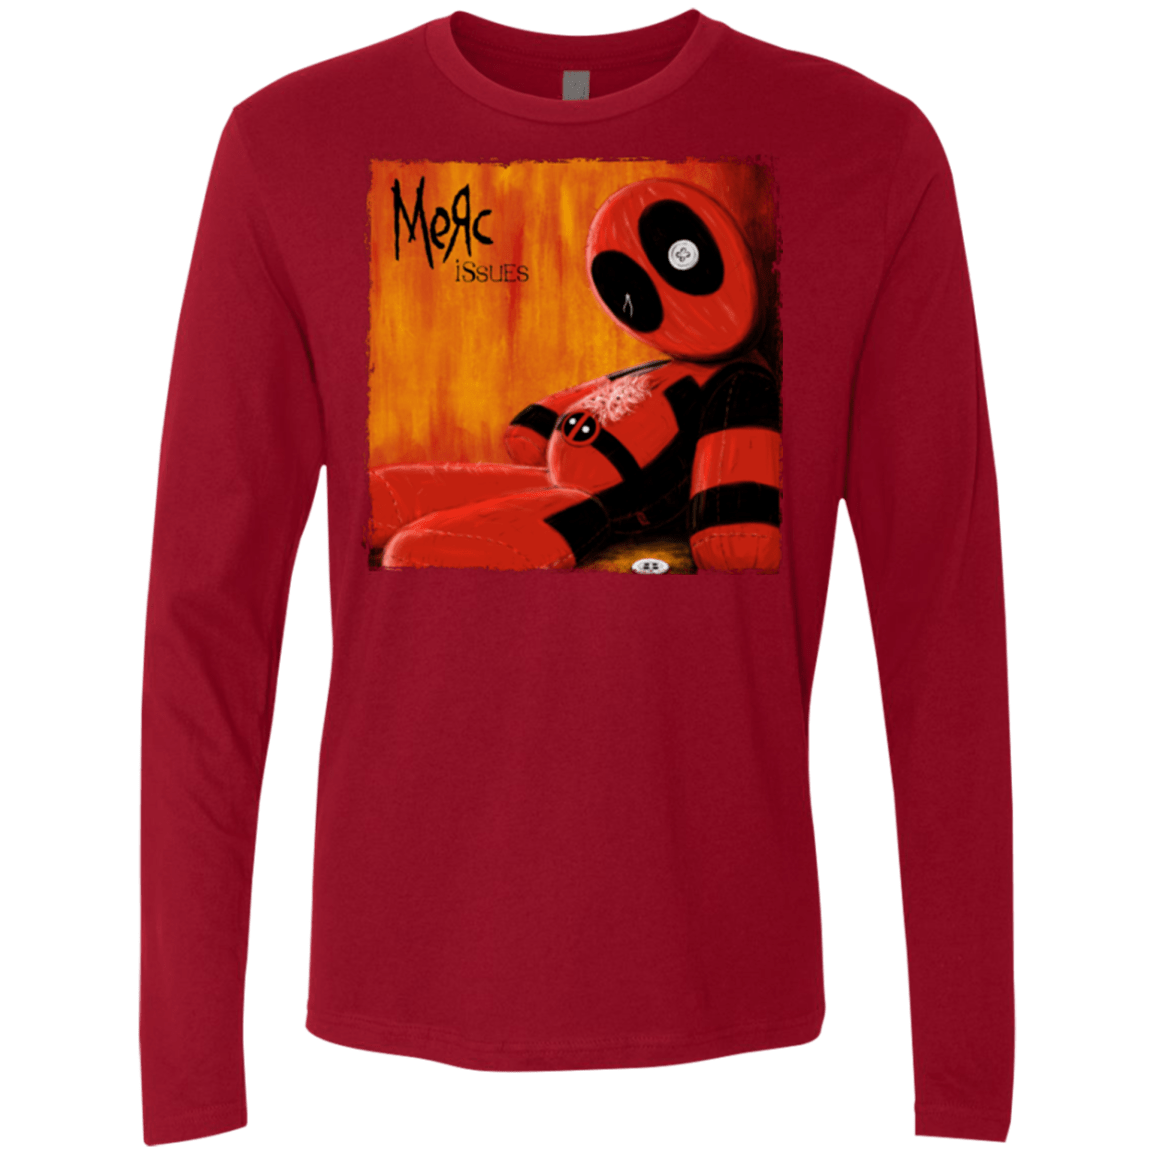 T-Shirts Cardinal / Small Issues Men's Premium Long Sleeve